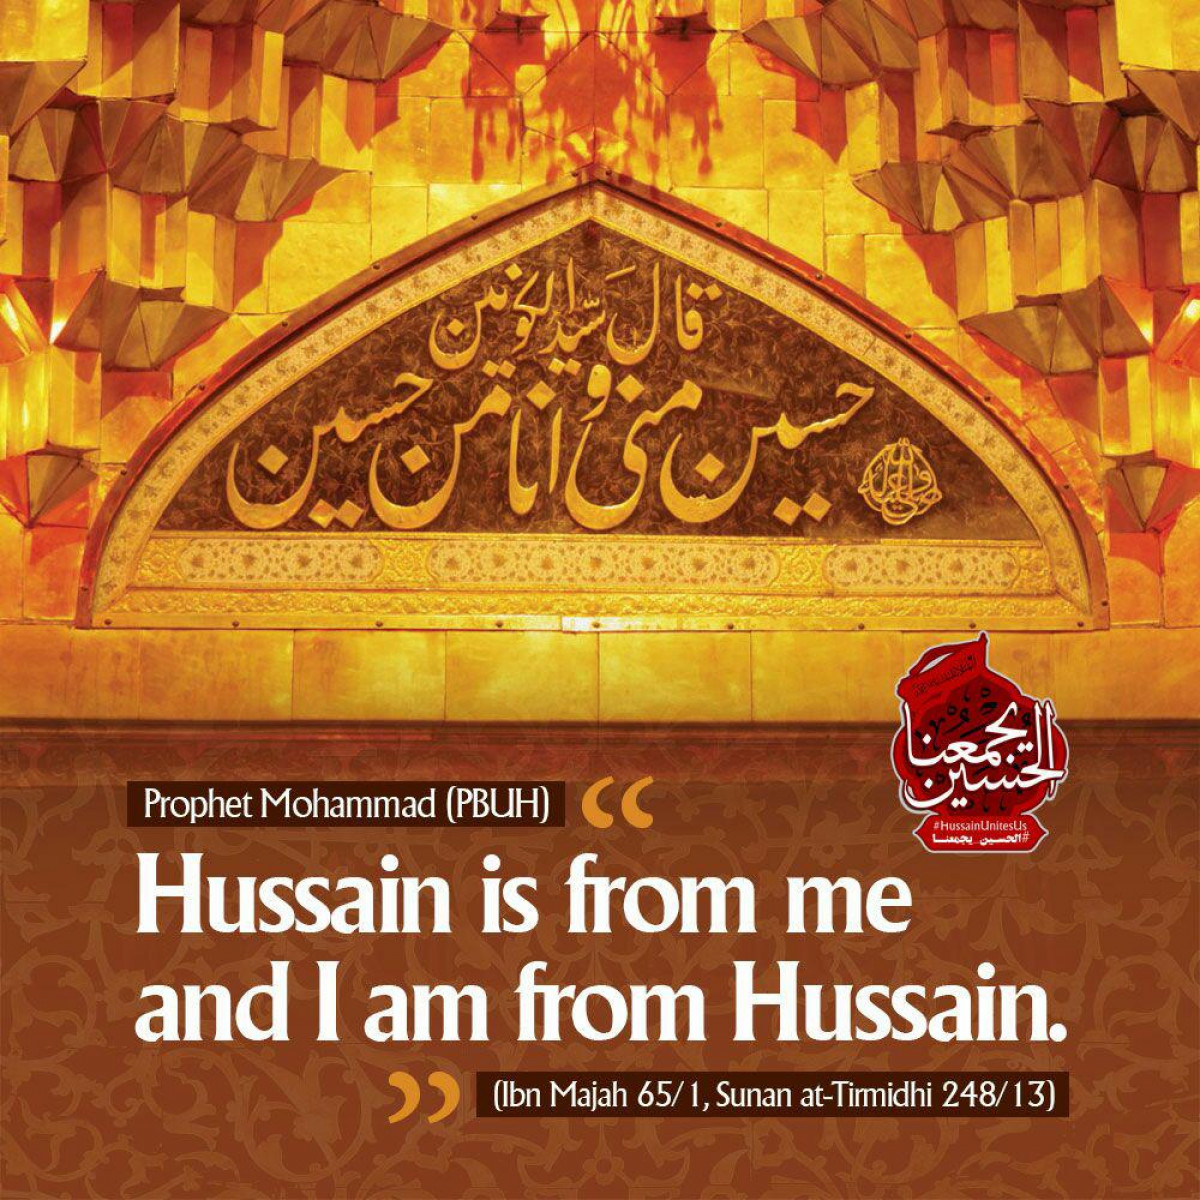 Hussain is from me and I am from Hussain.